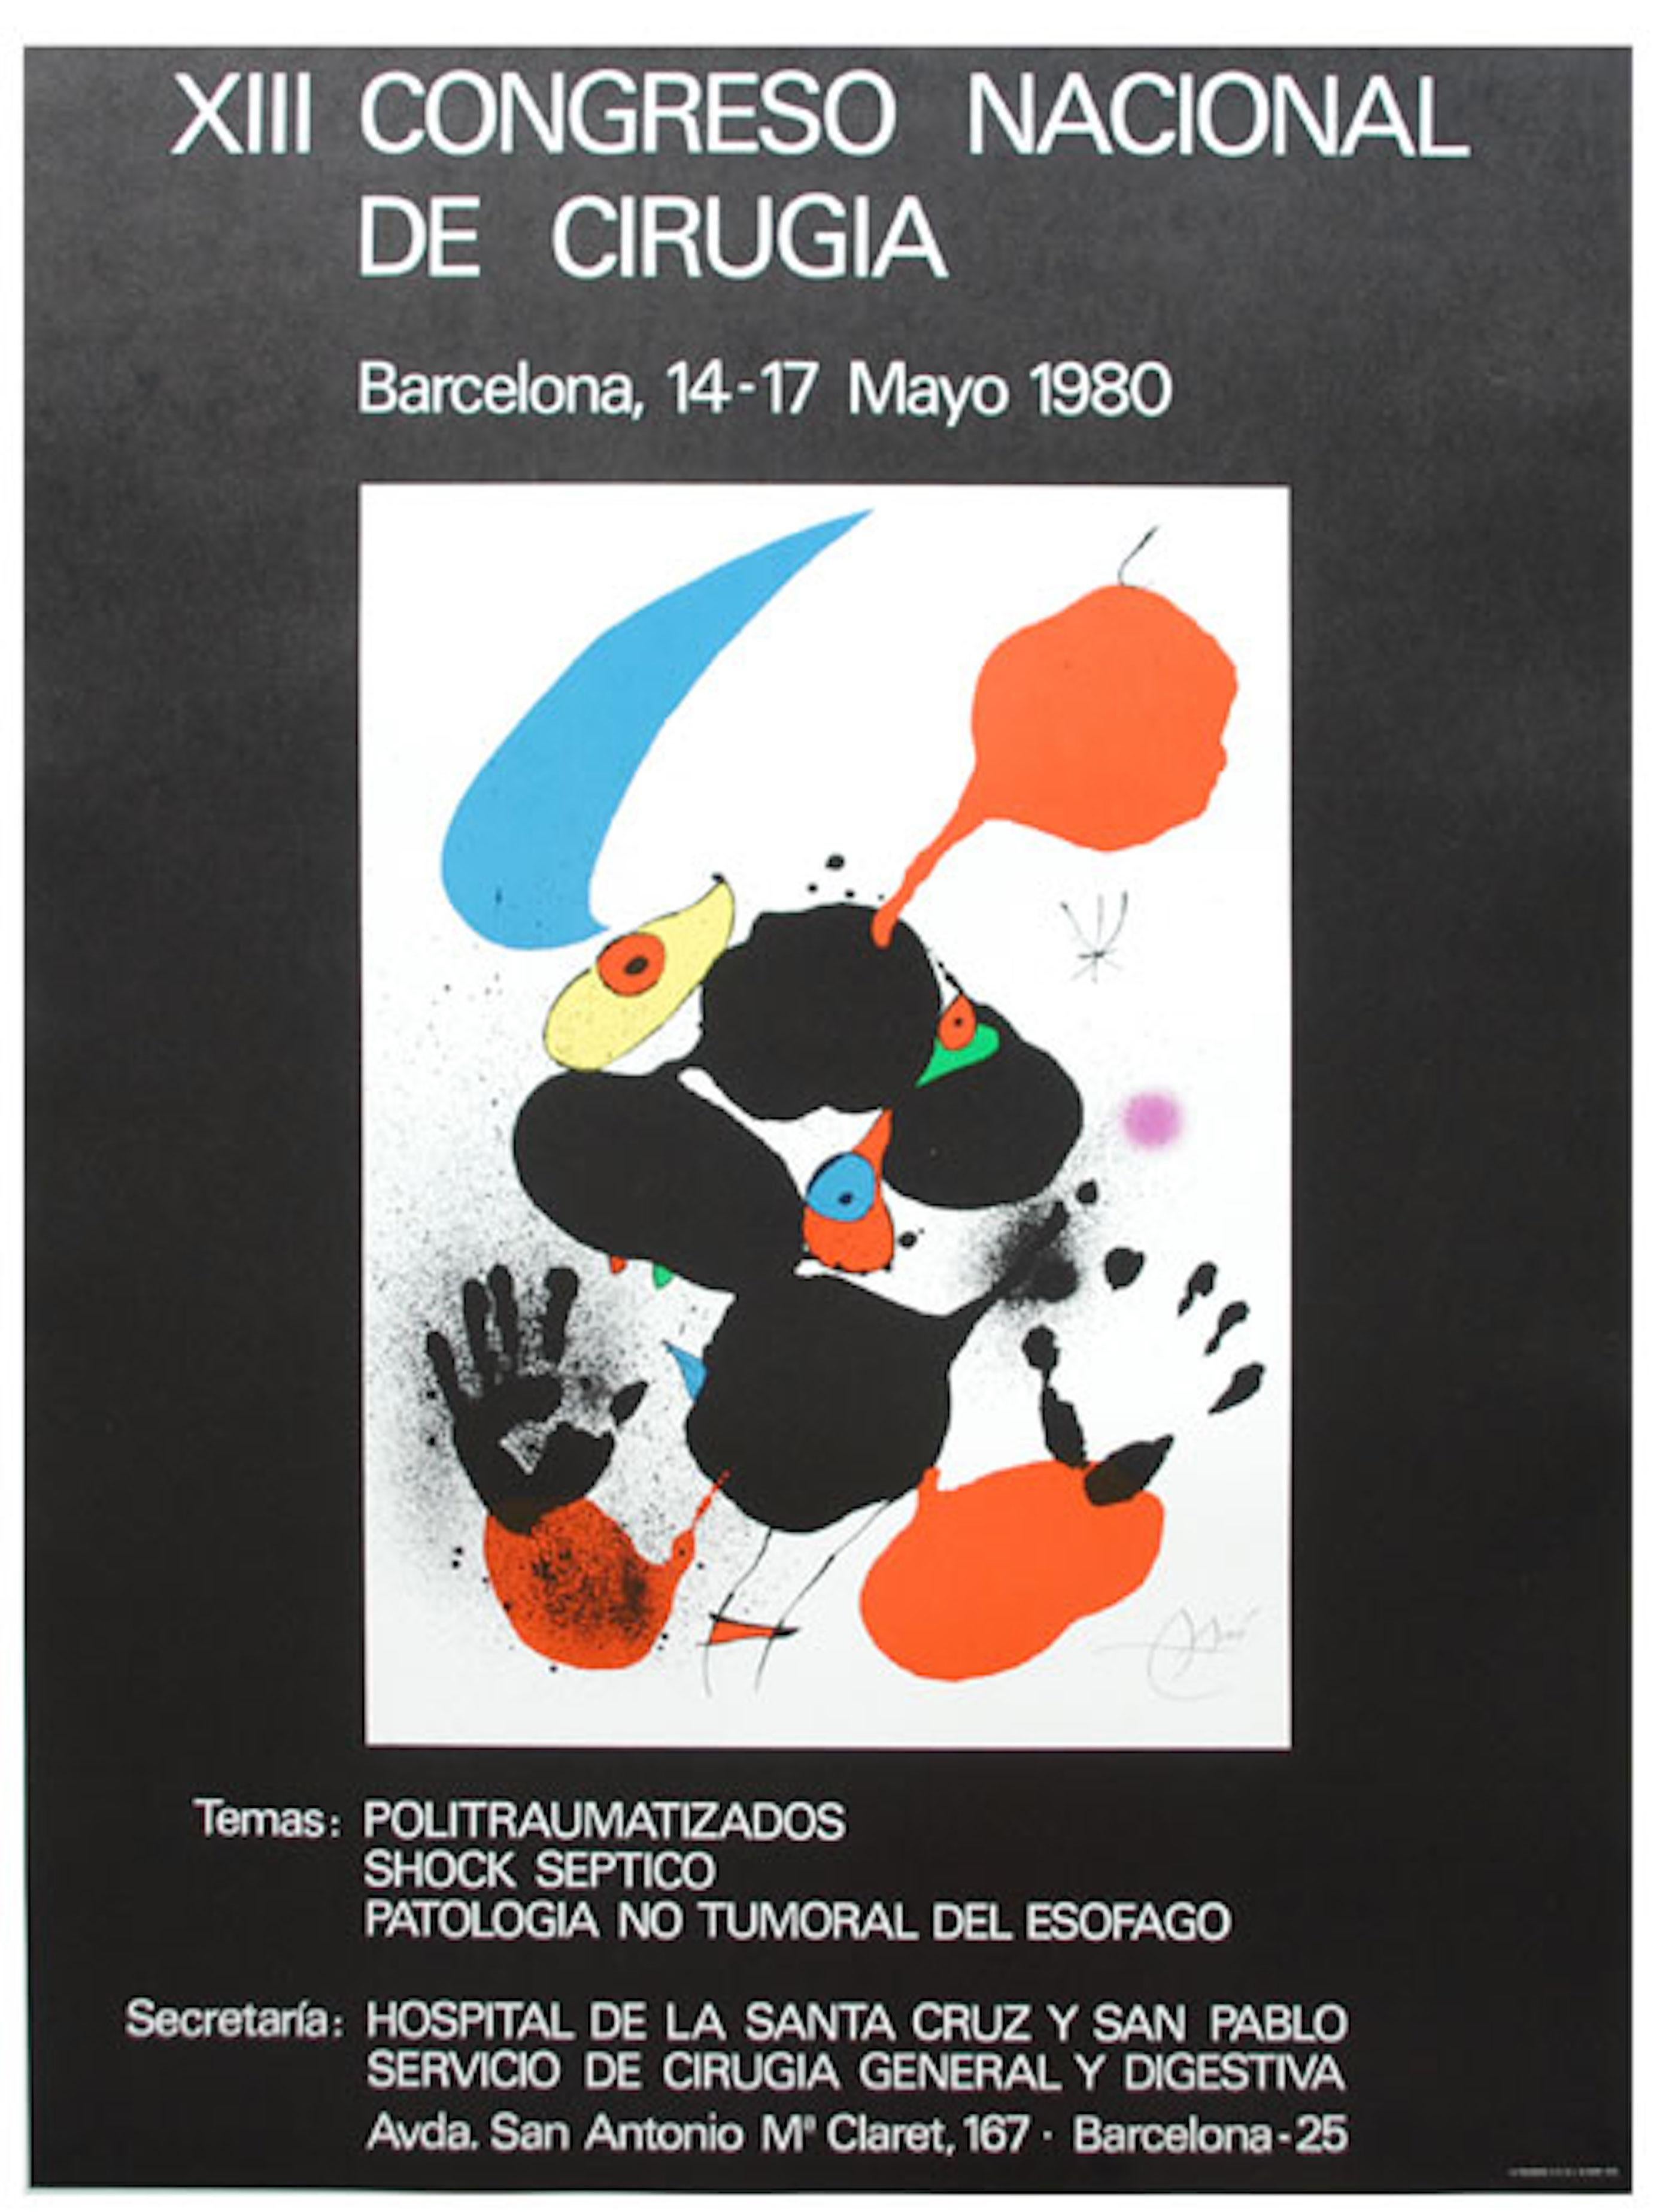 Exhibition poster
Made on the occasion of the exhibition in Barcelona 1980
Signed in print
In great condition